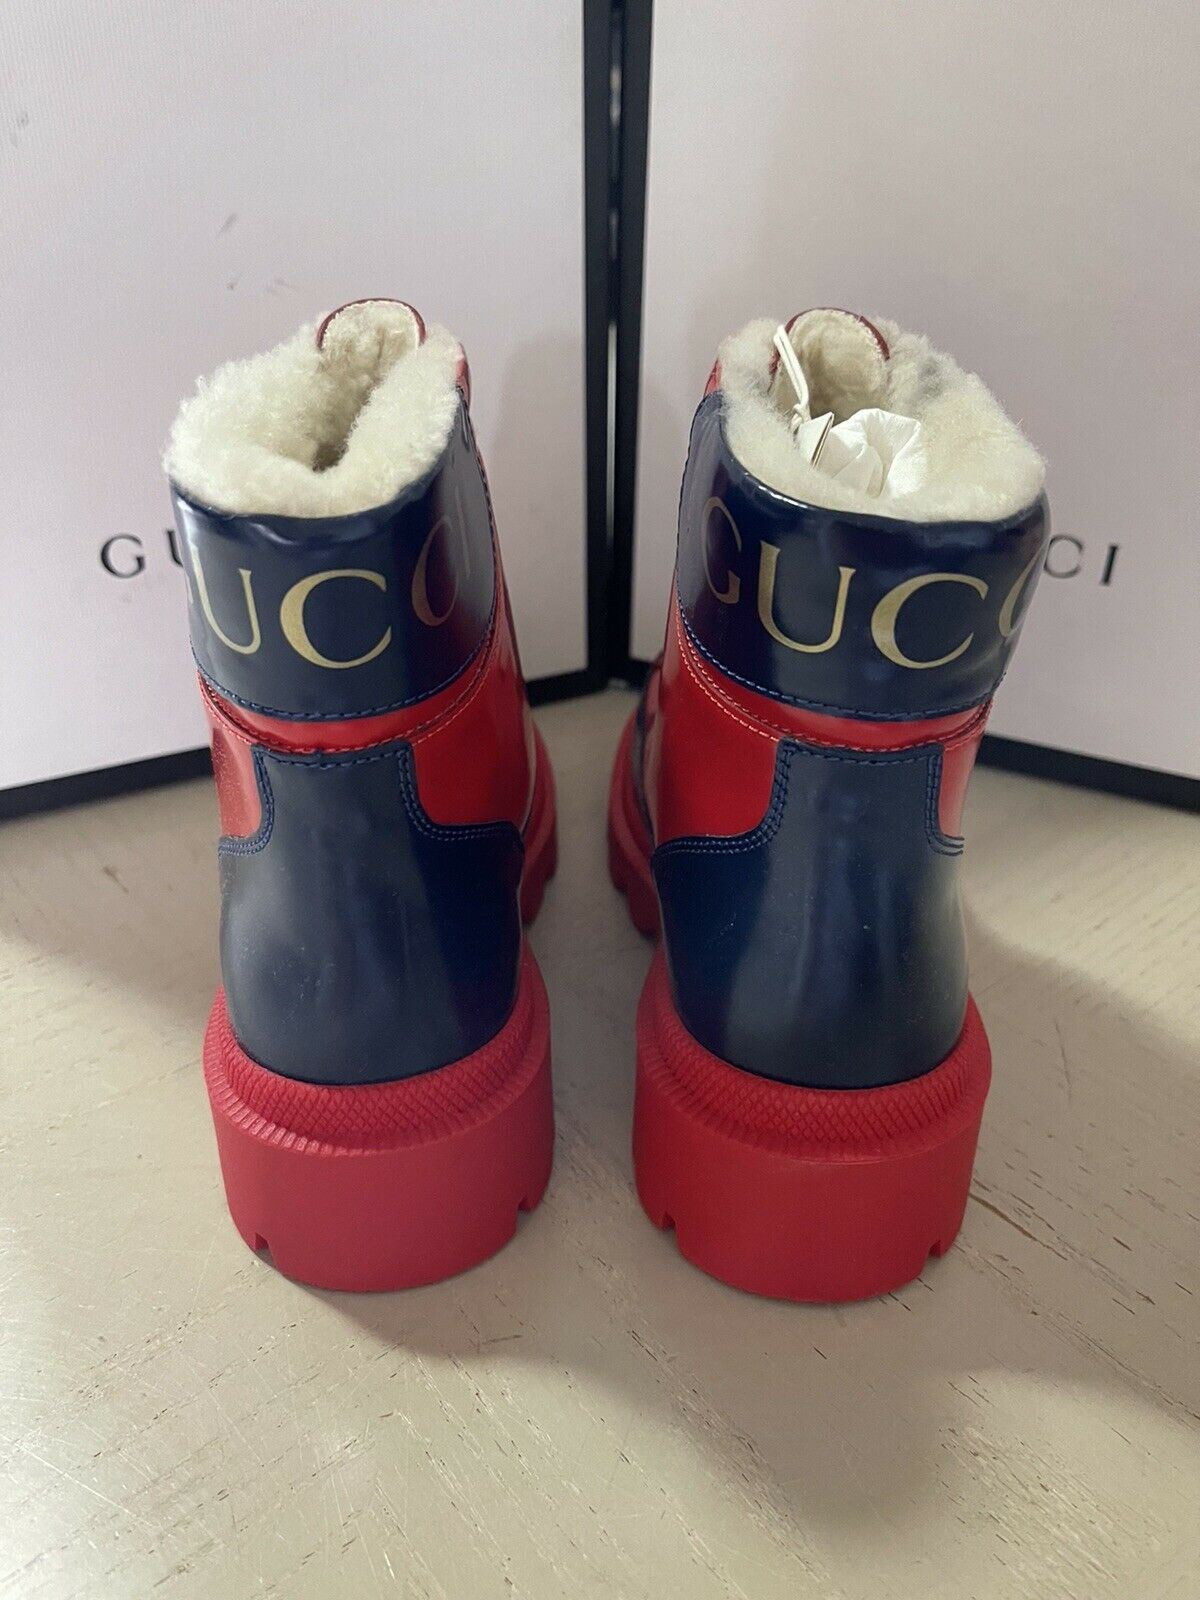 NIB Gucci Kids Lether Boot With Faux Fur Lining Red/Black 32/1 US Age 6.5